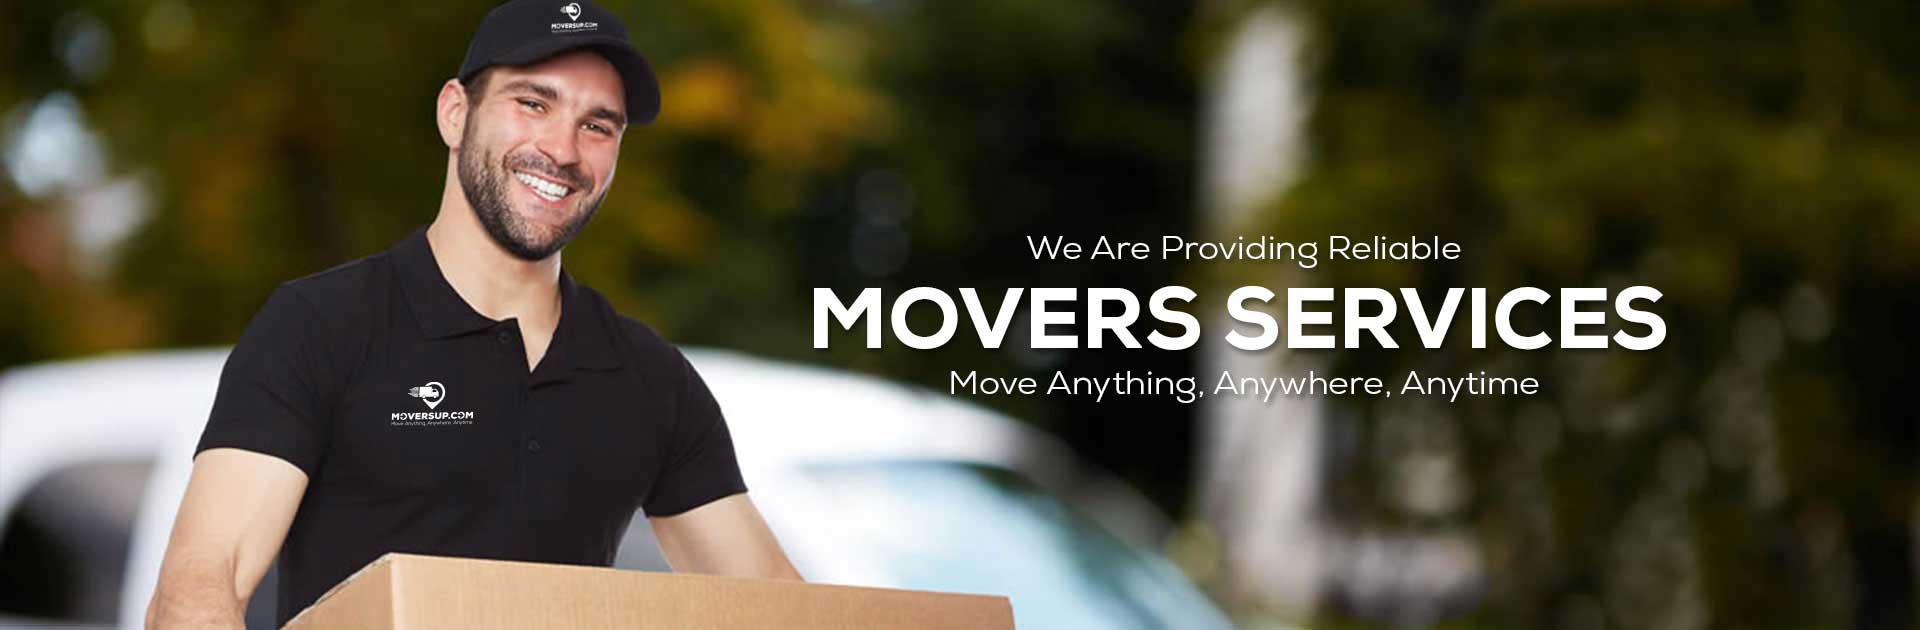 Movers and Packers in Mirdif Dubai